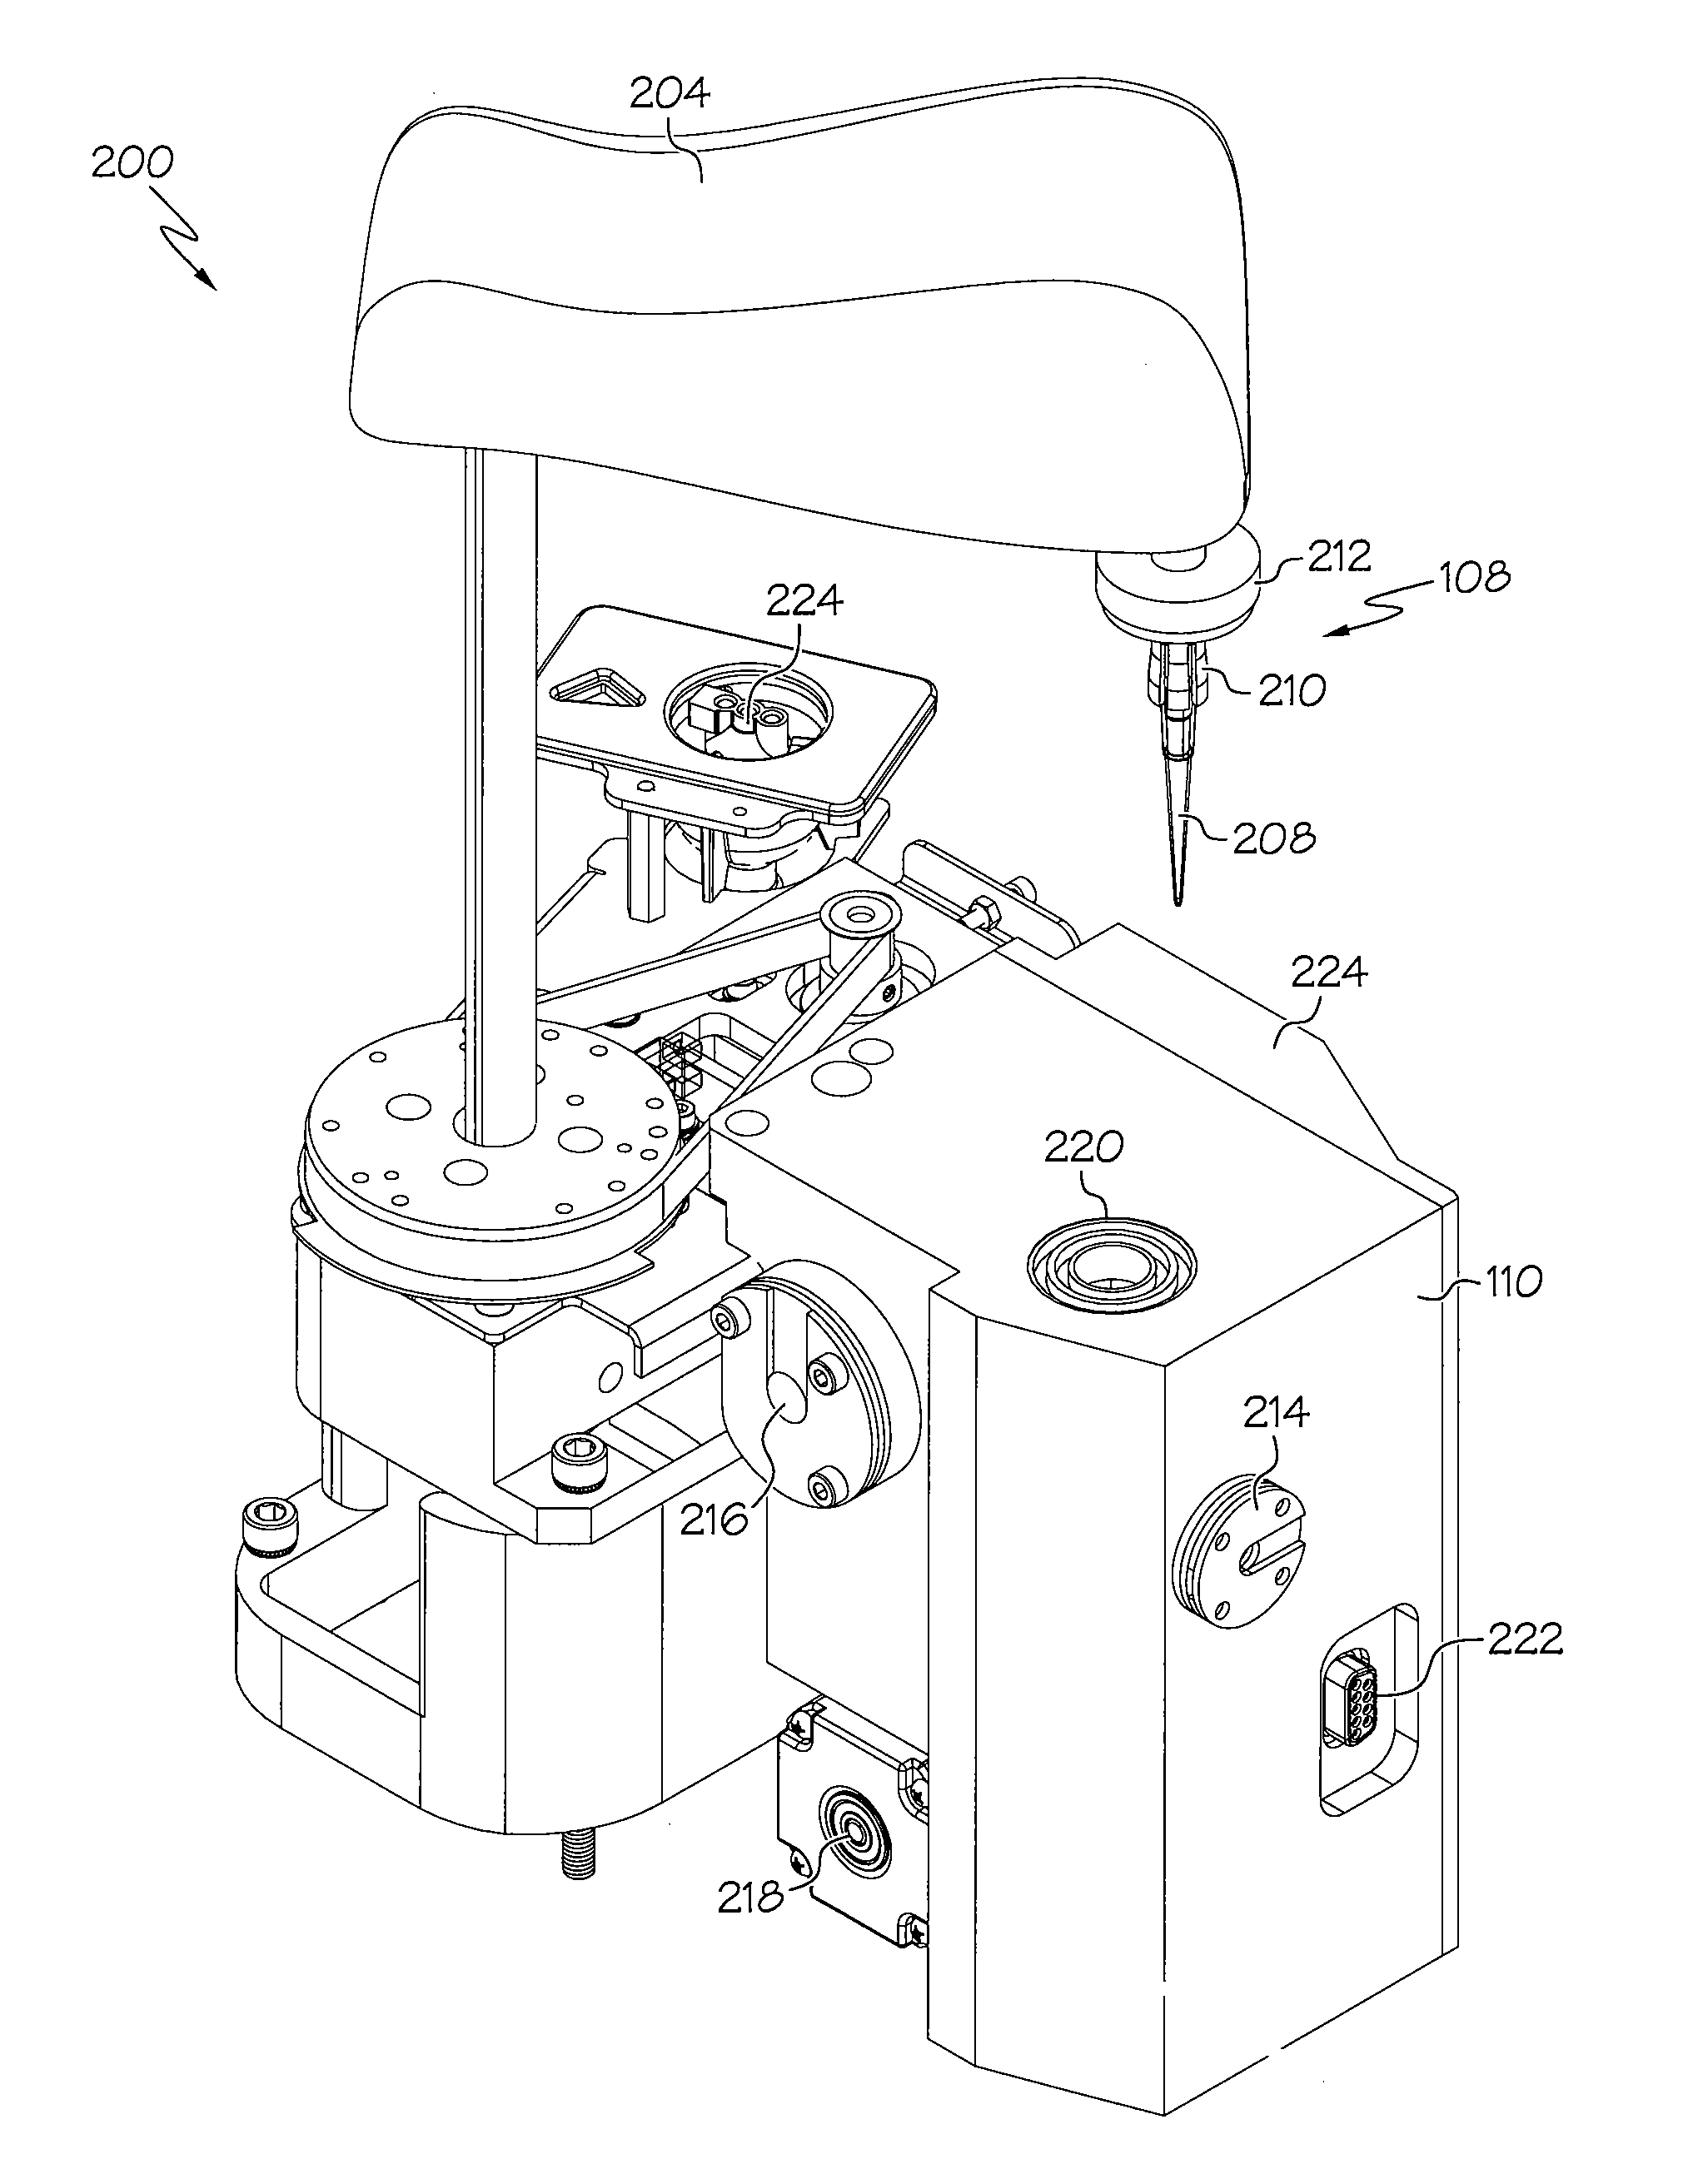 Device and associated methods for performing luminescence and fluorescence measurements of a sample